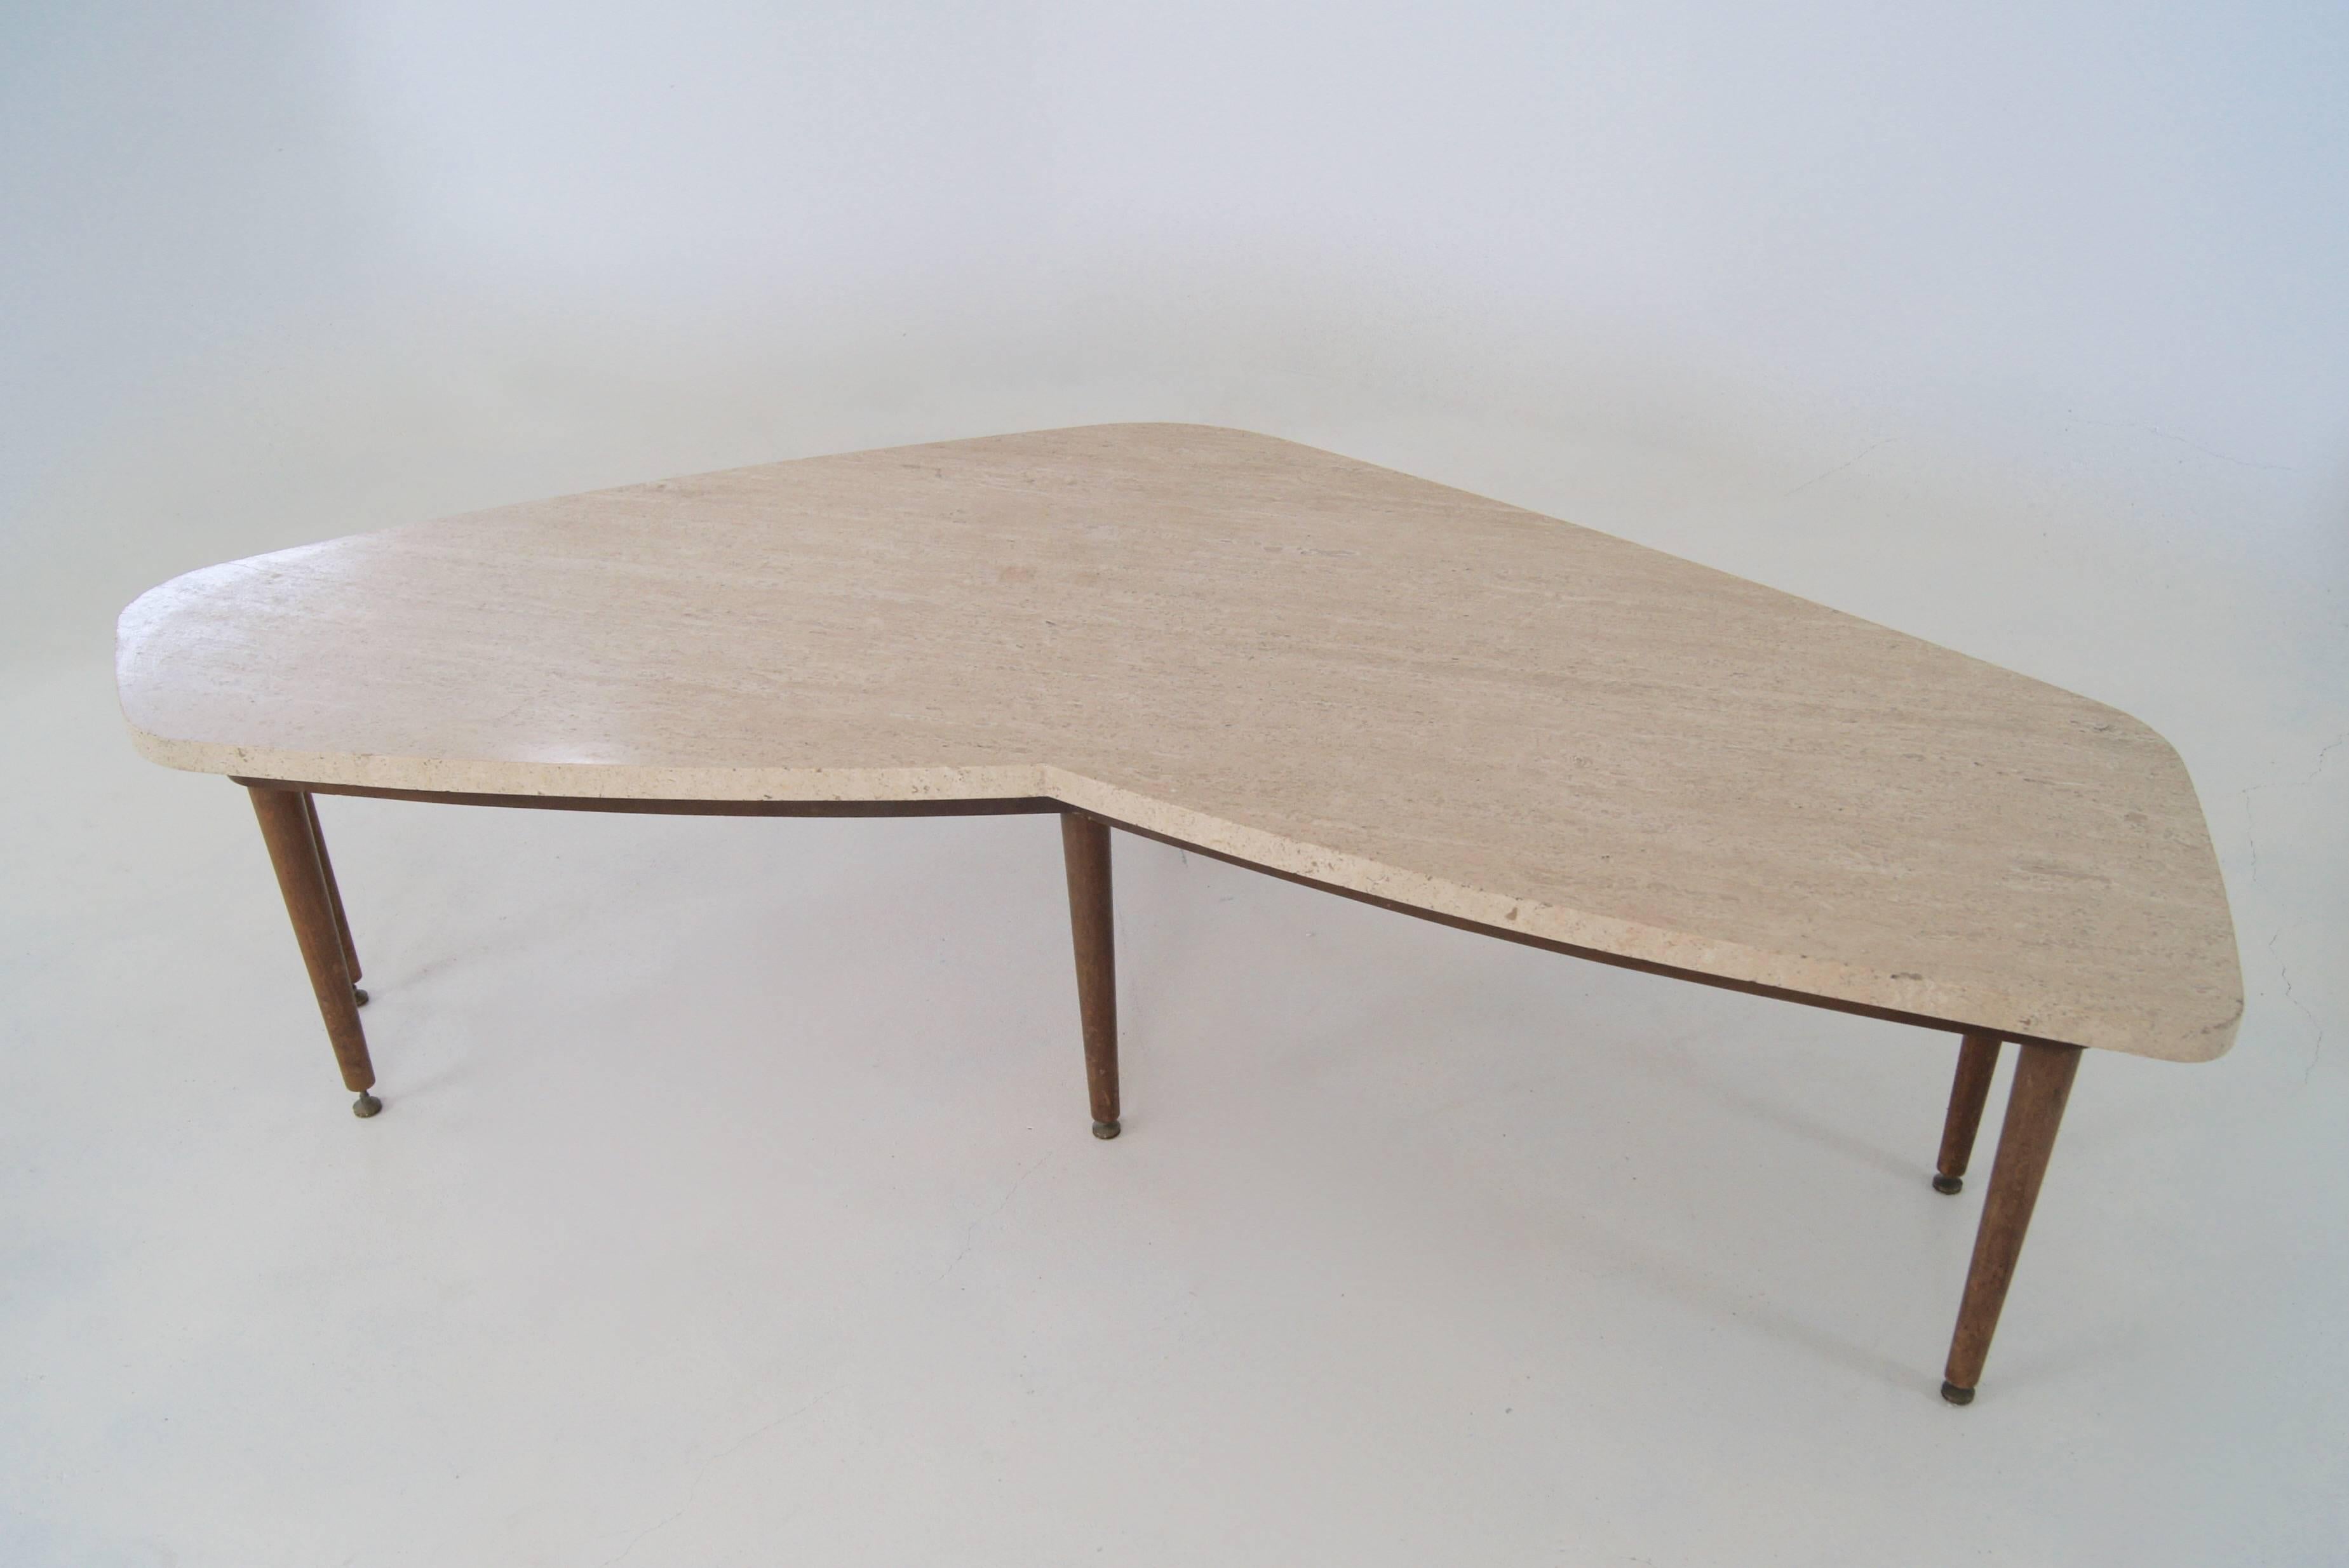 Free-form or angular kidney shaped table with travertine top on a wooden base with six legs. The legs have height adjustable brass feet. The sculptural design with nice details. Reminds of shapes often used by Gio Ponti.